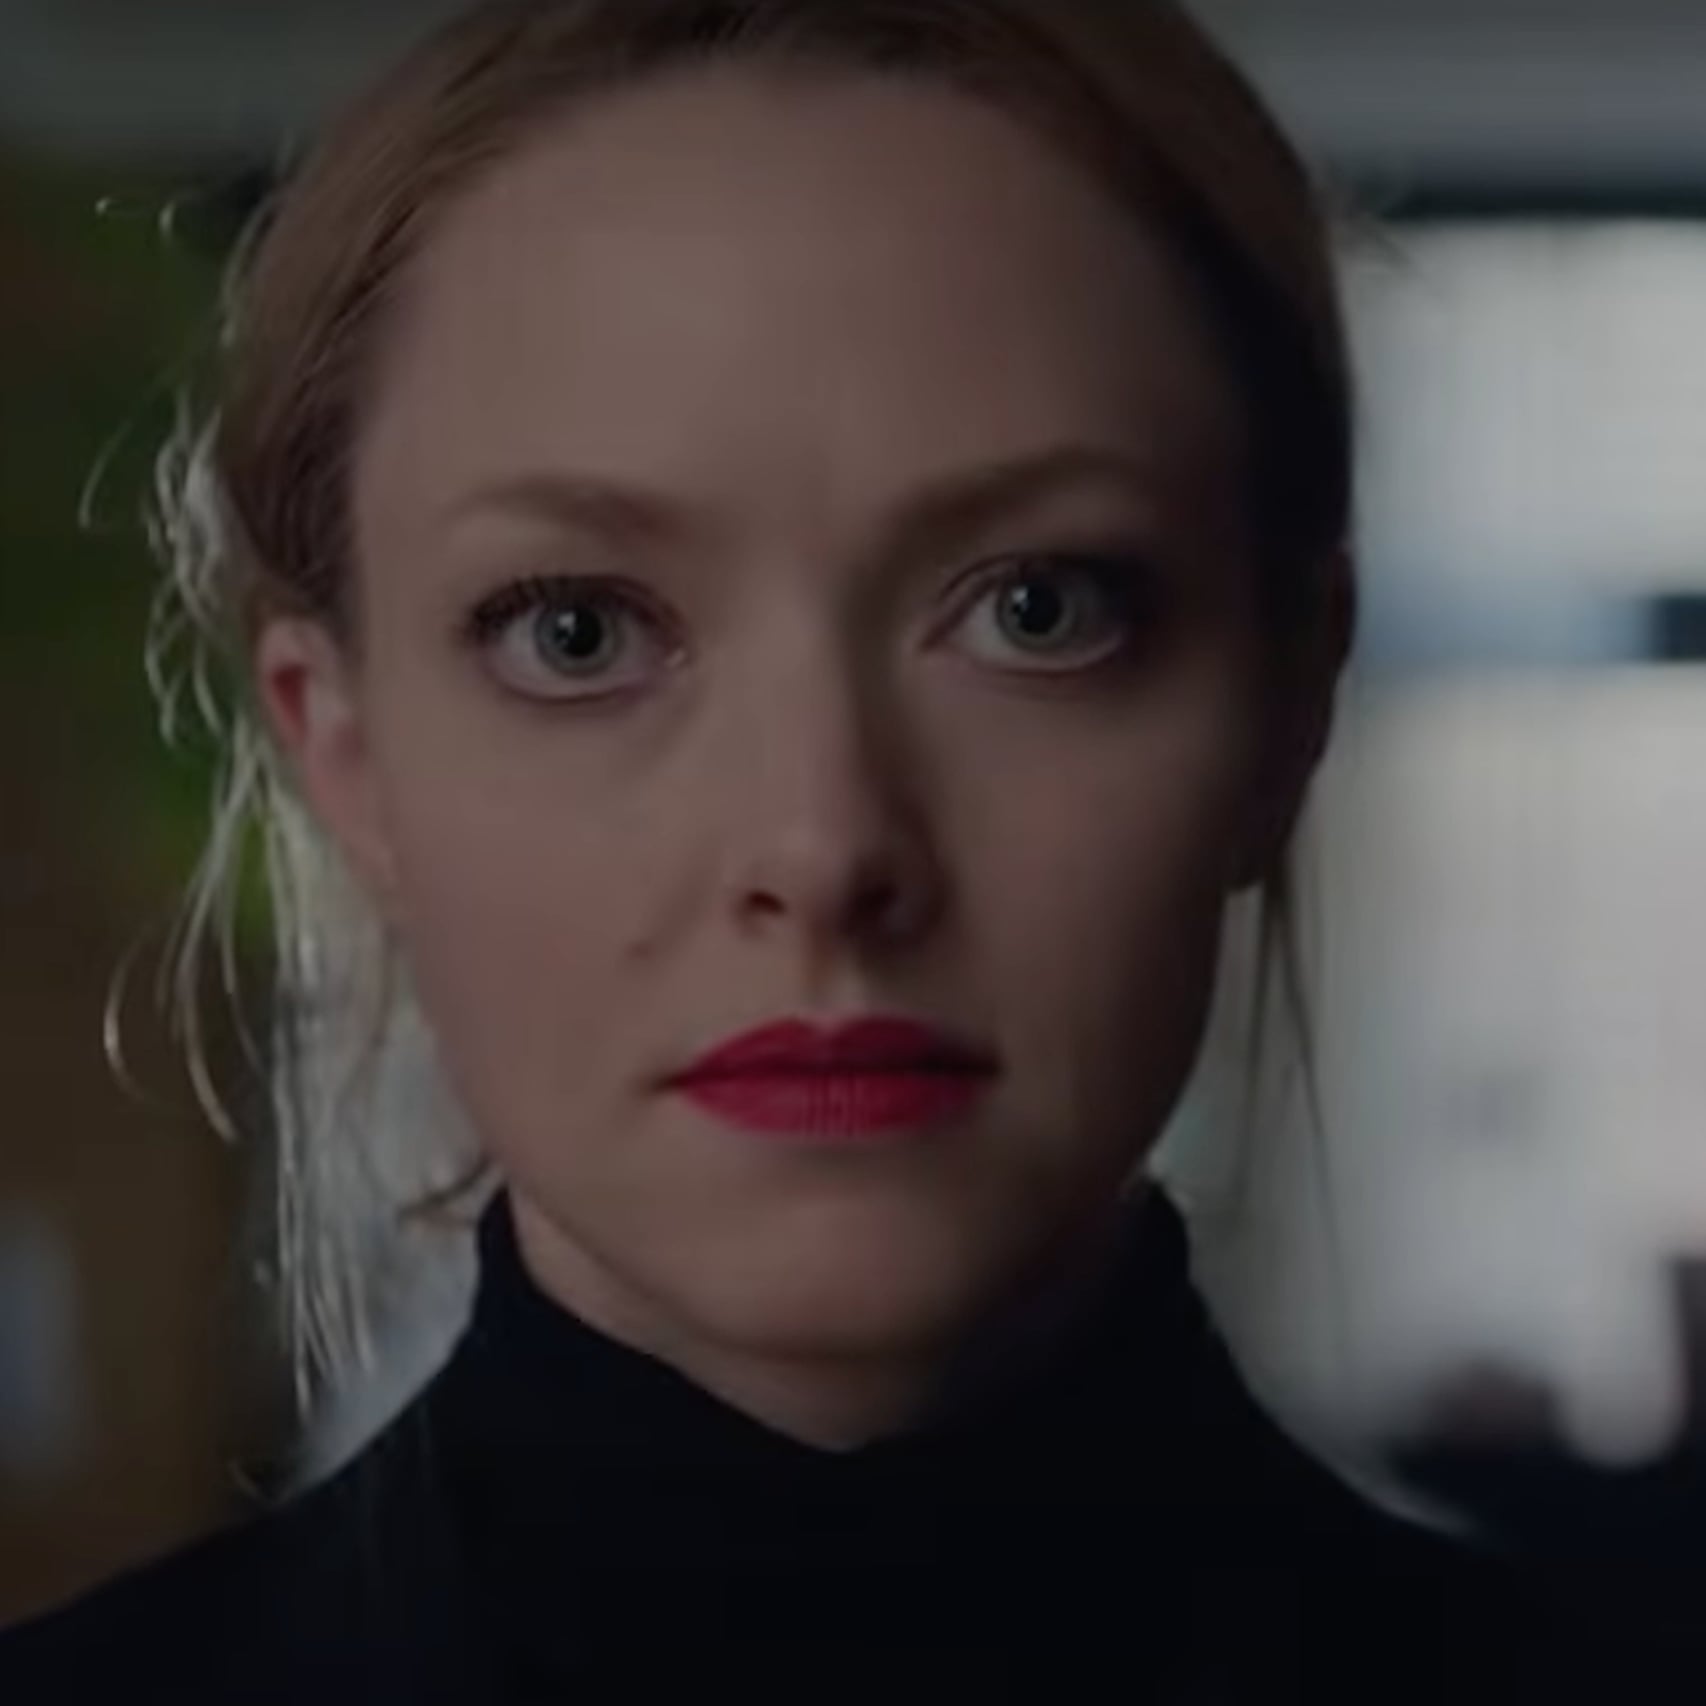 Amanda Seyfried playing the character of Elizabeth Holmes in The Dropout